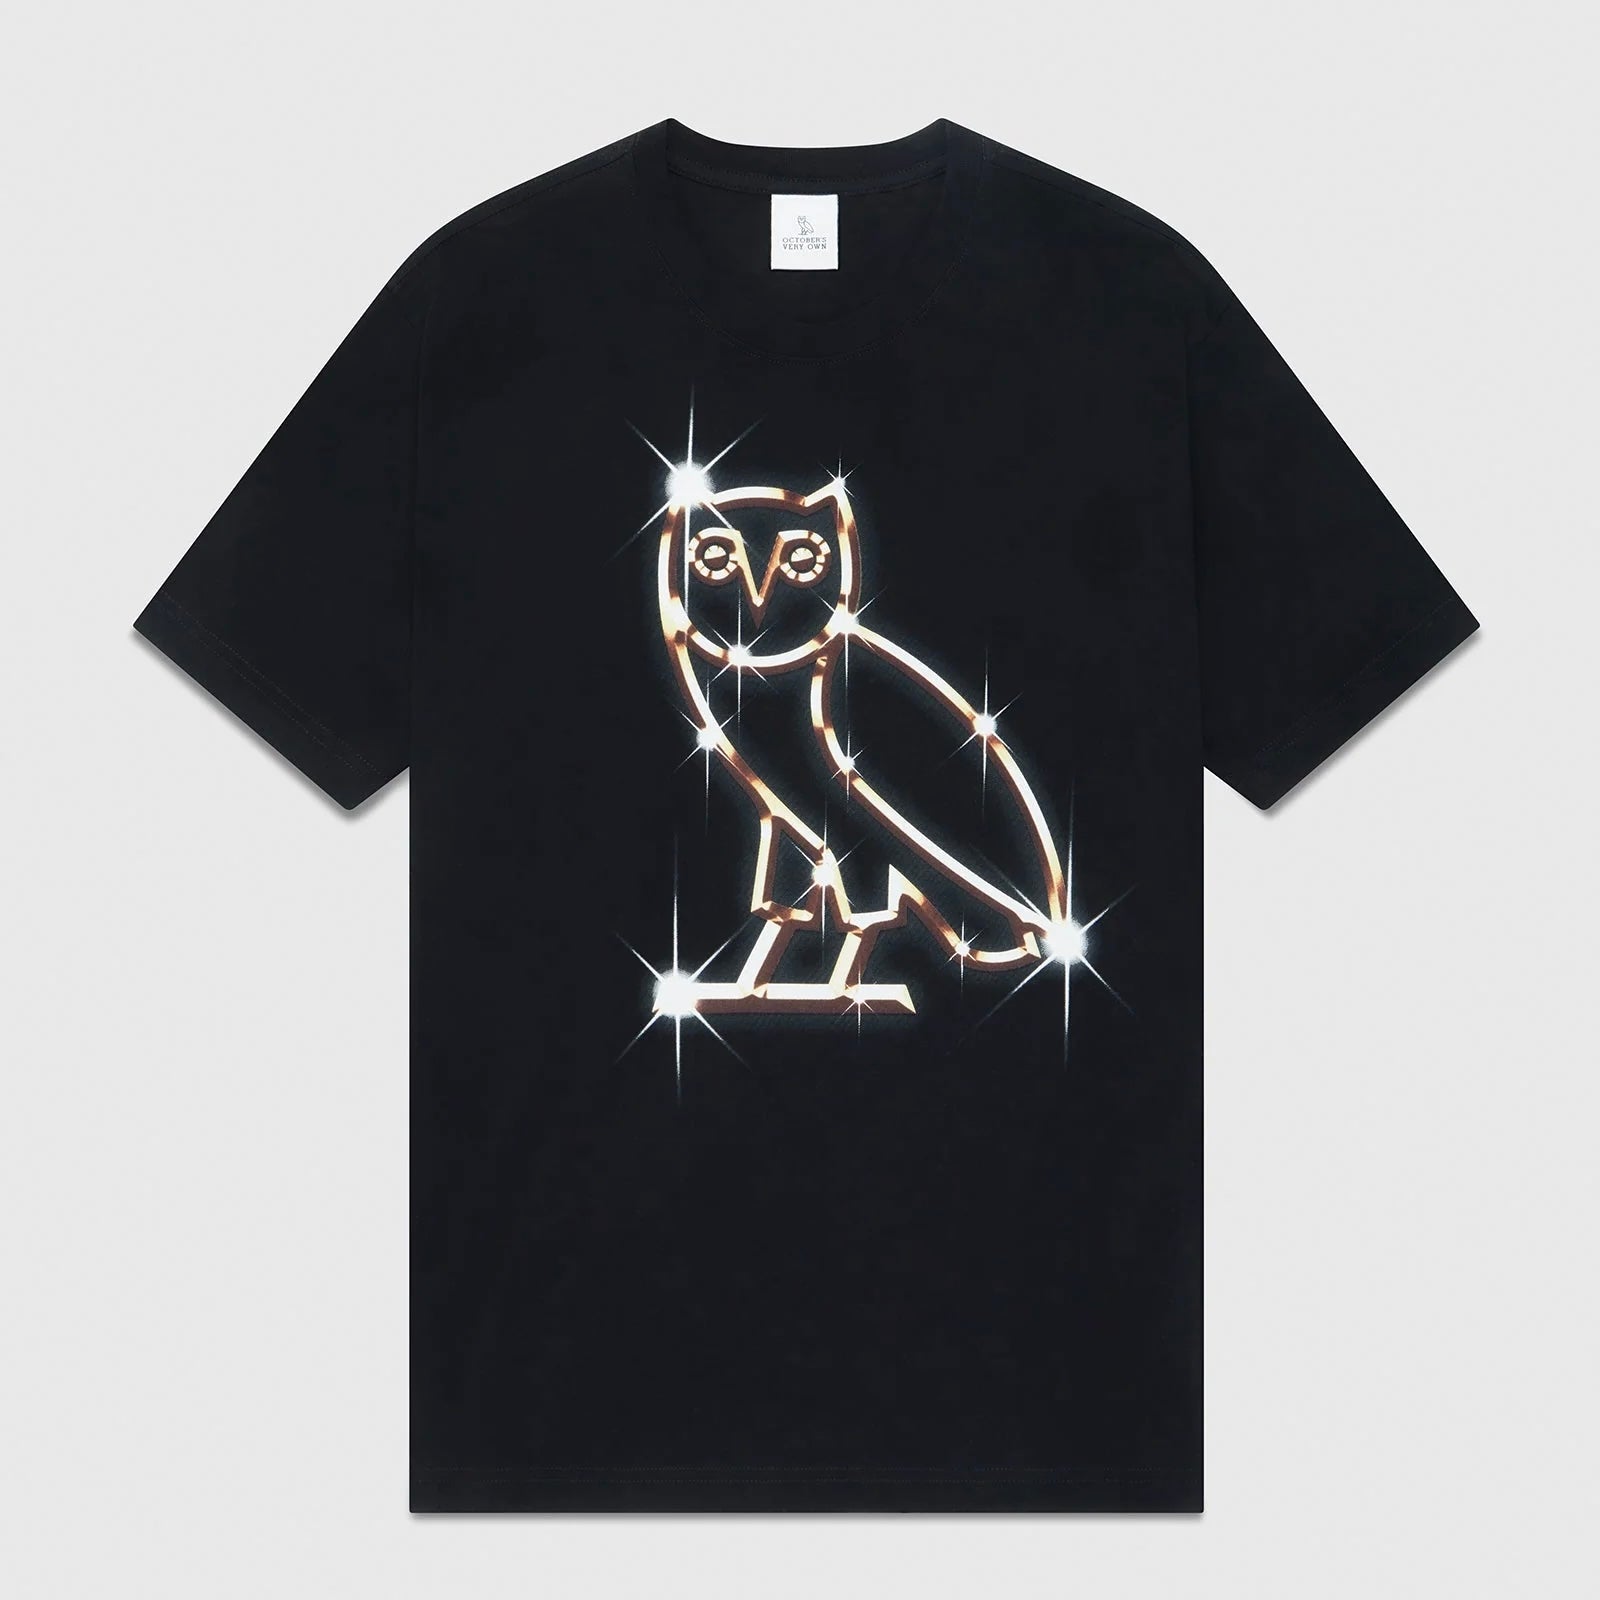 OVO Black Bling T-Shirt Front View